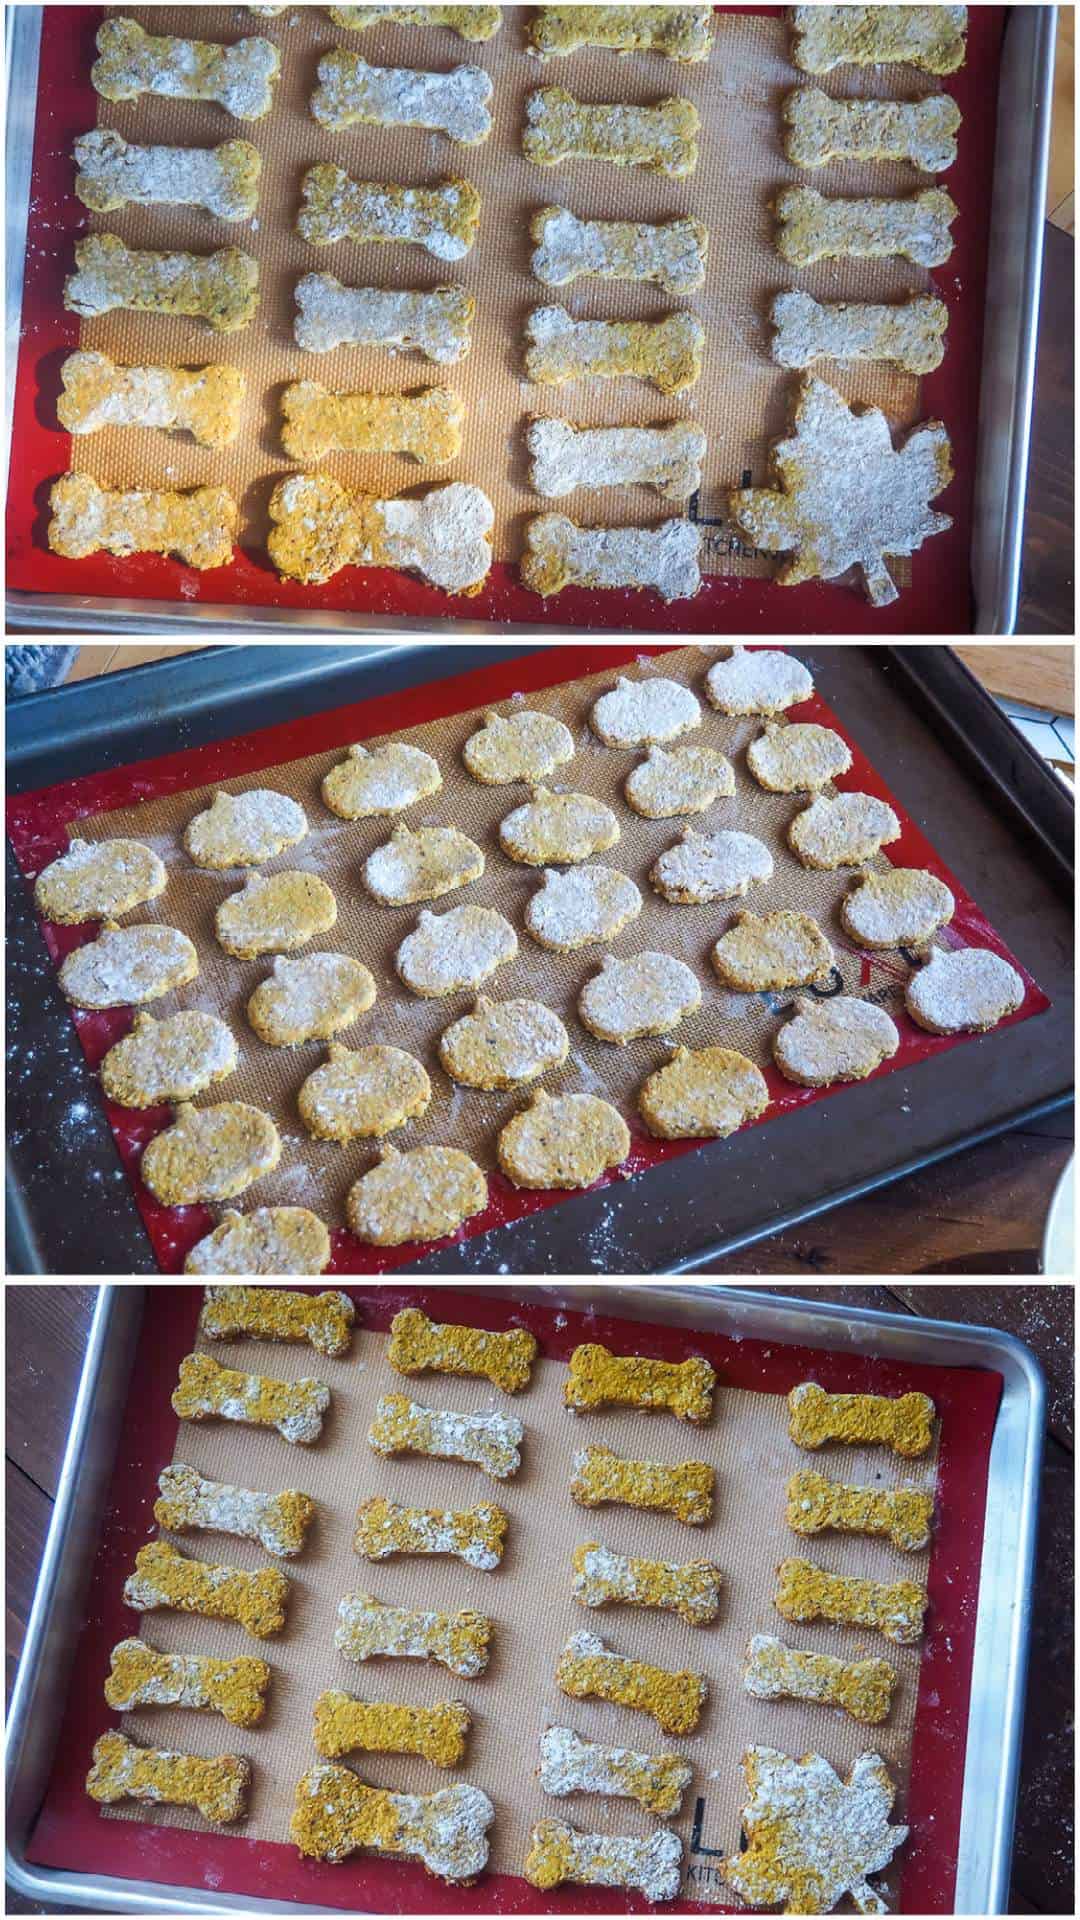 A collage of images showing sweet potato and cranberry dog treats cut out and baked on trays.